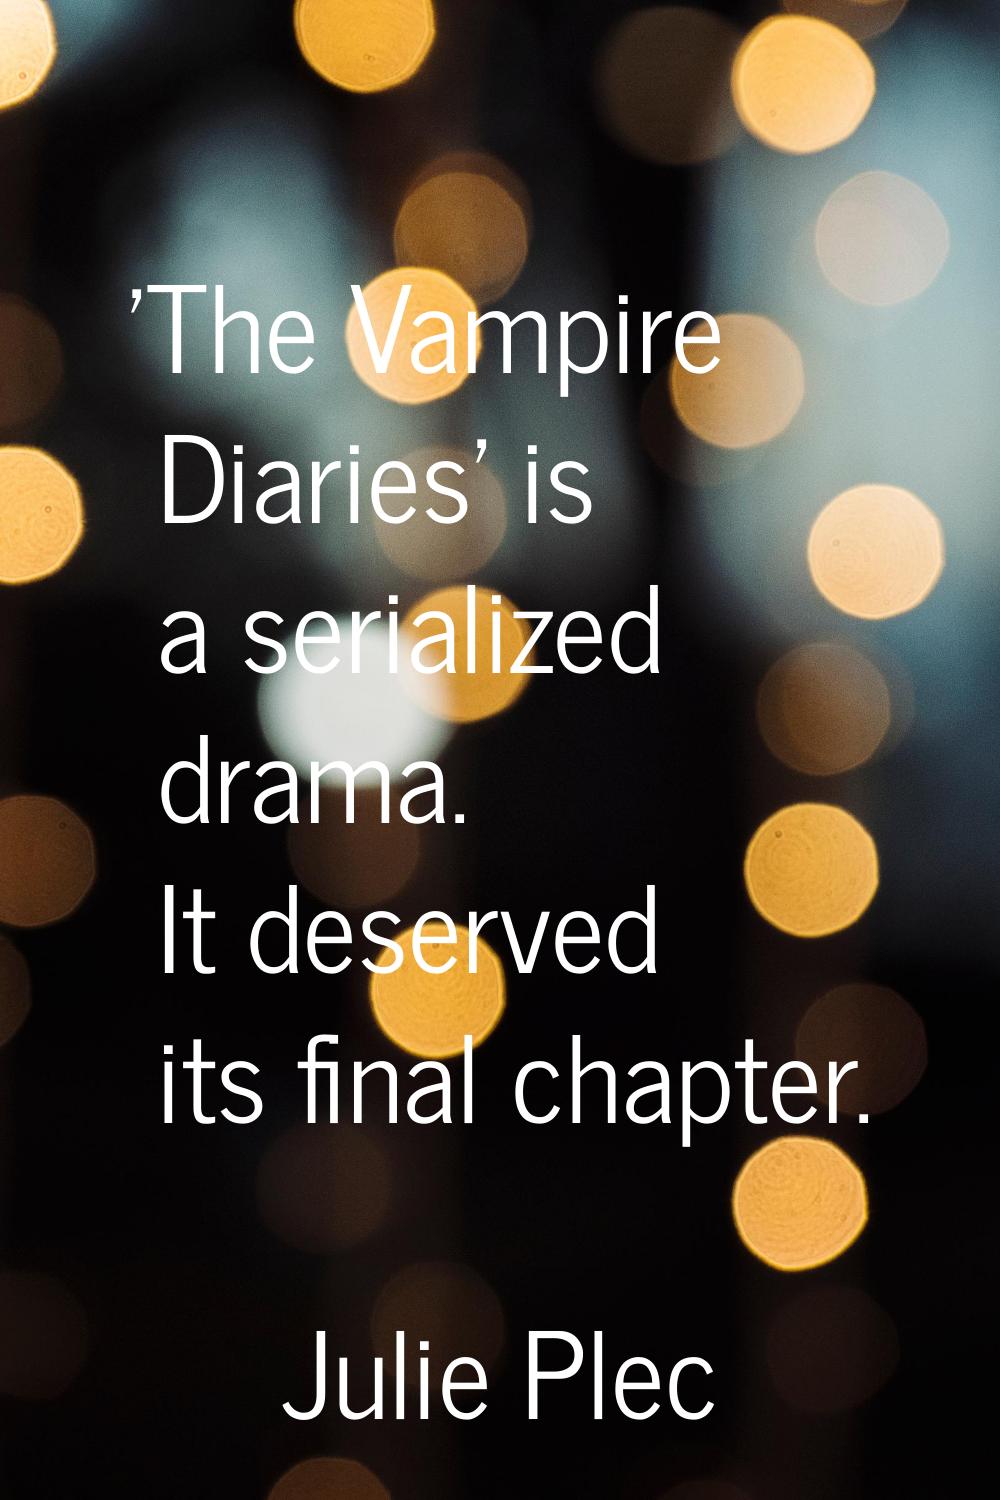 'The Vampire Diaries' is a serialized drama. It deserved its final chapter.